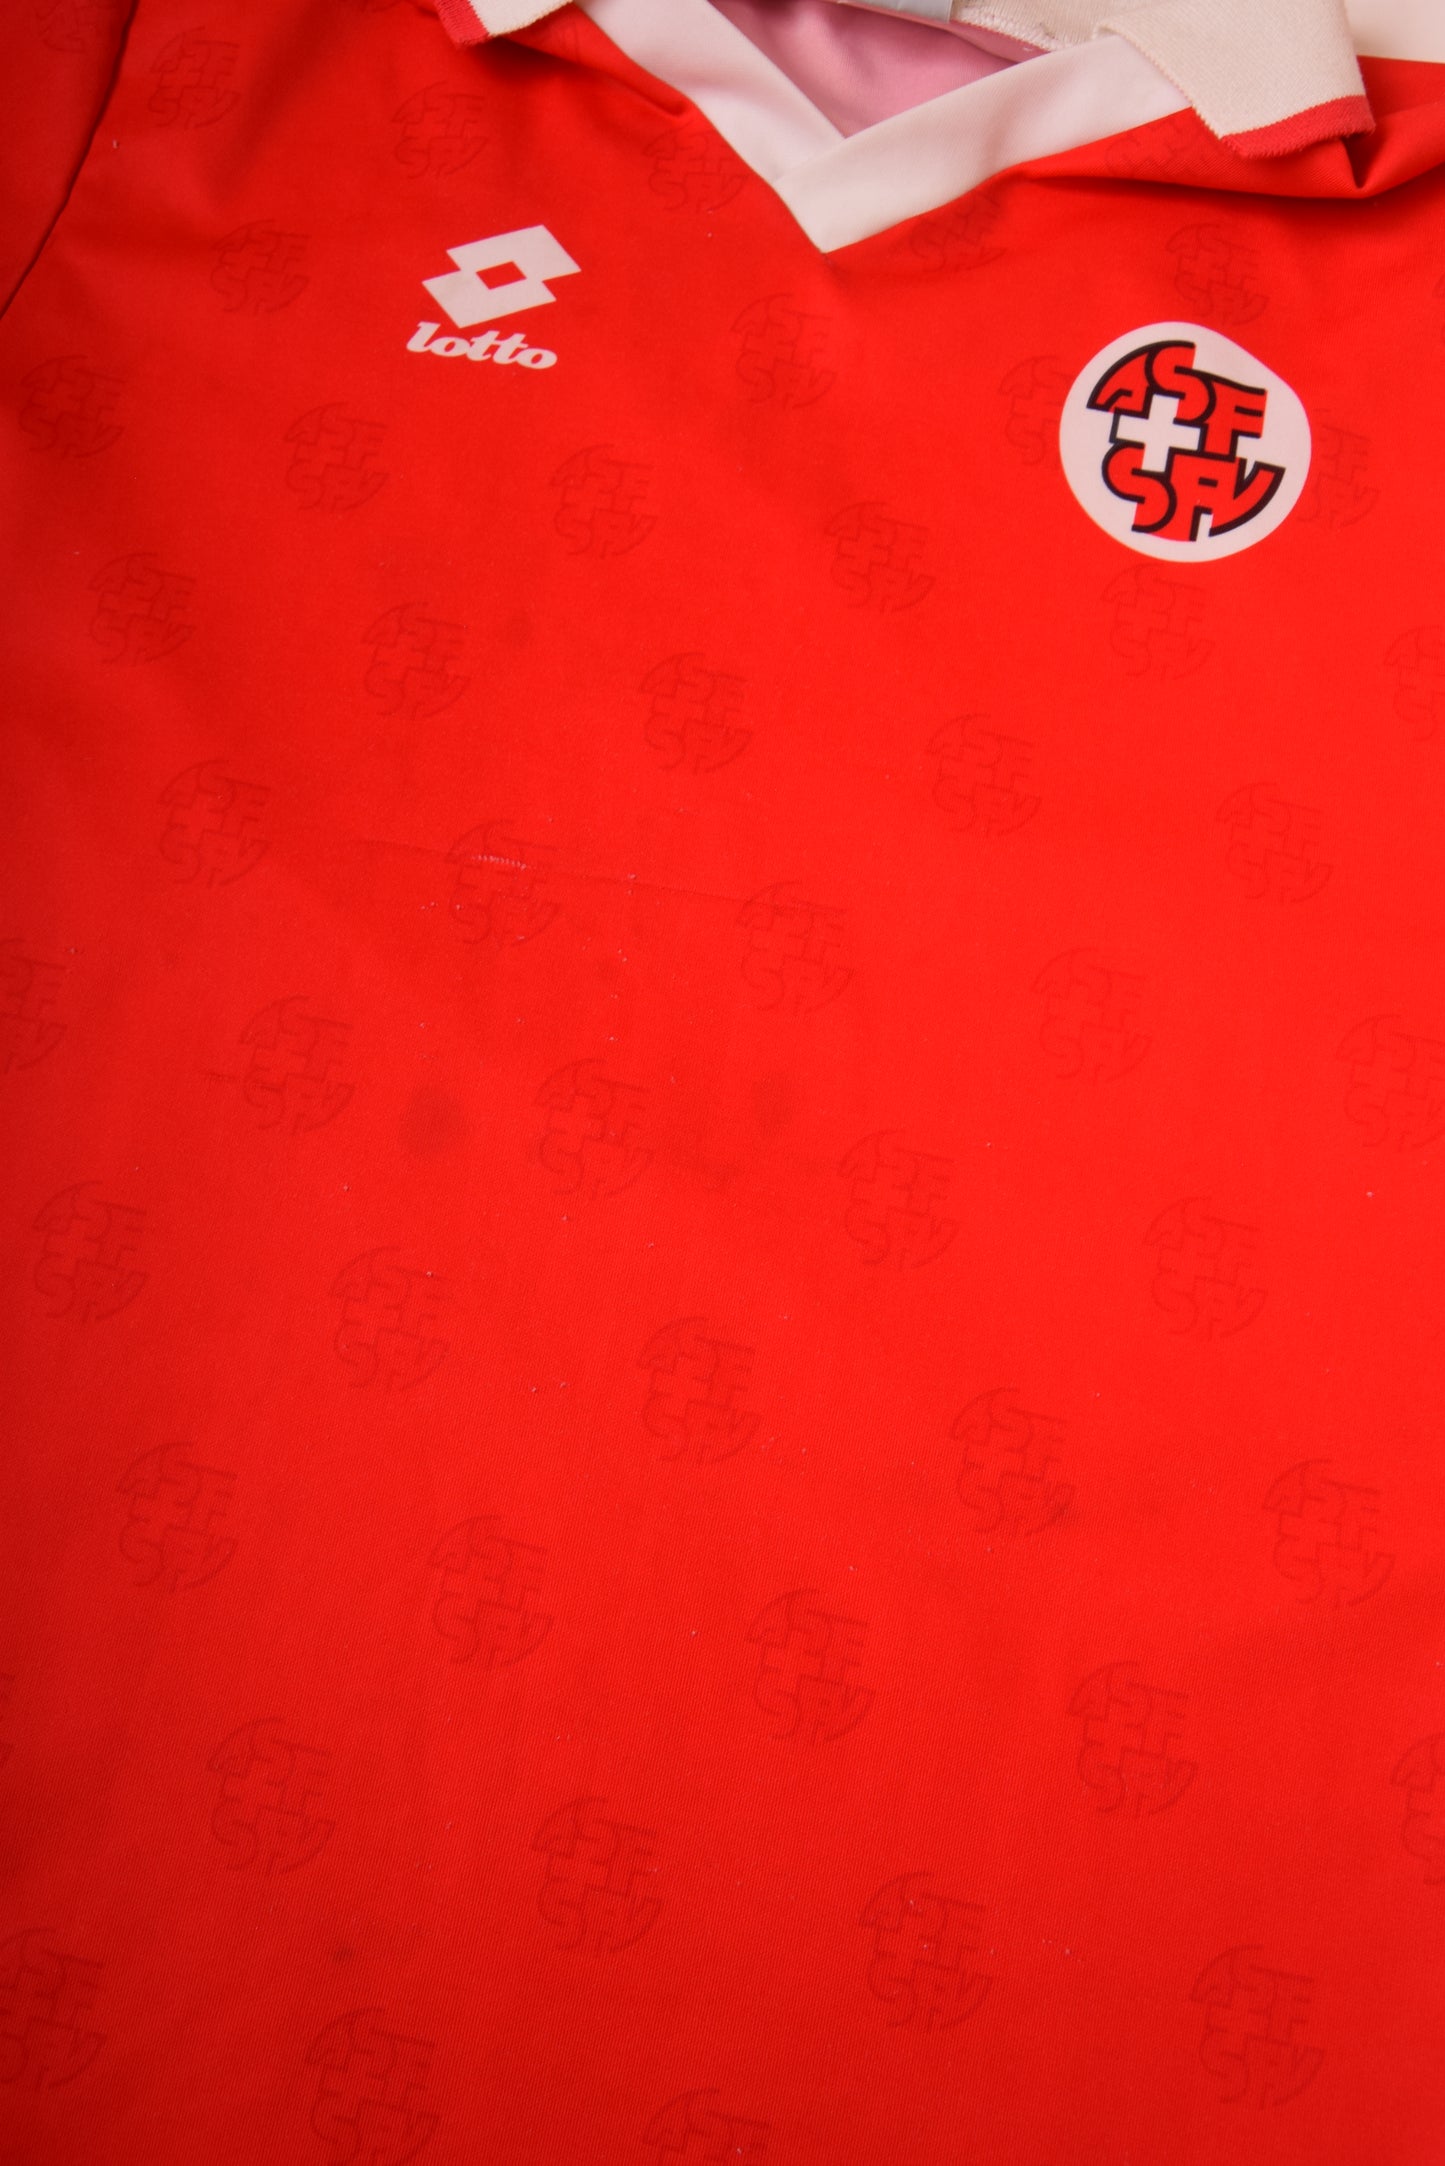 Vintage Switzerland 1994-1996 Lotto Home Football Shirt Red